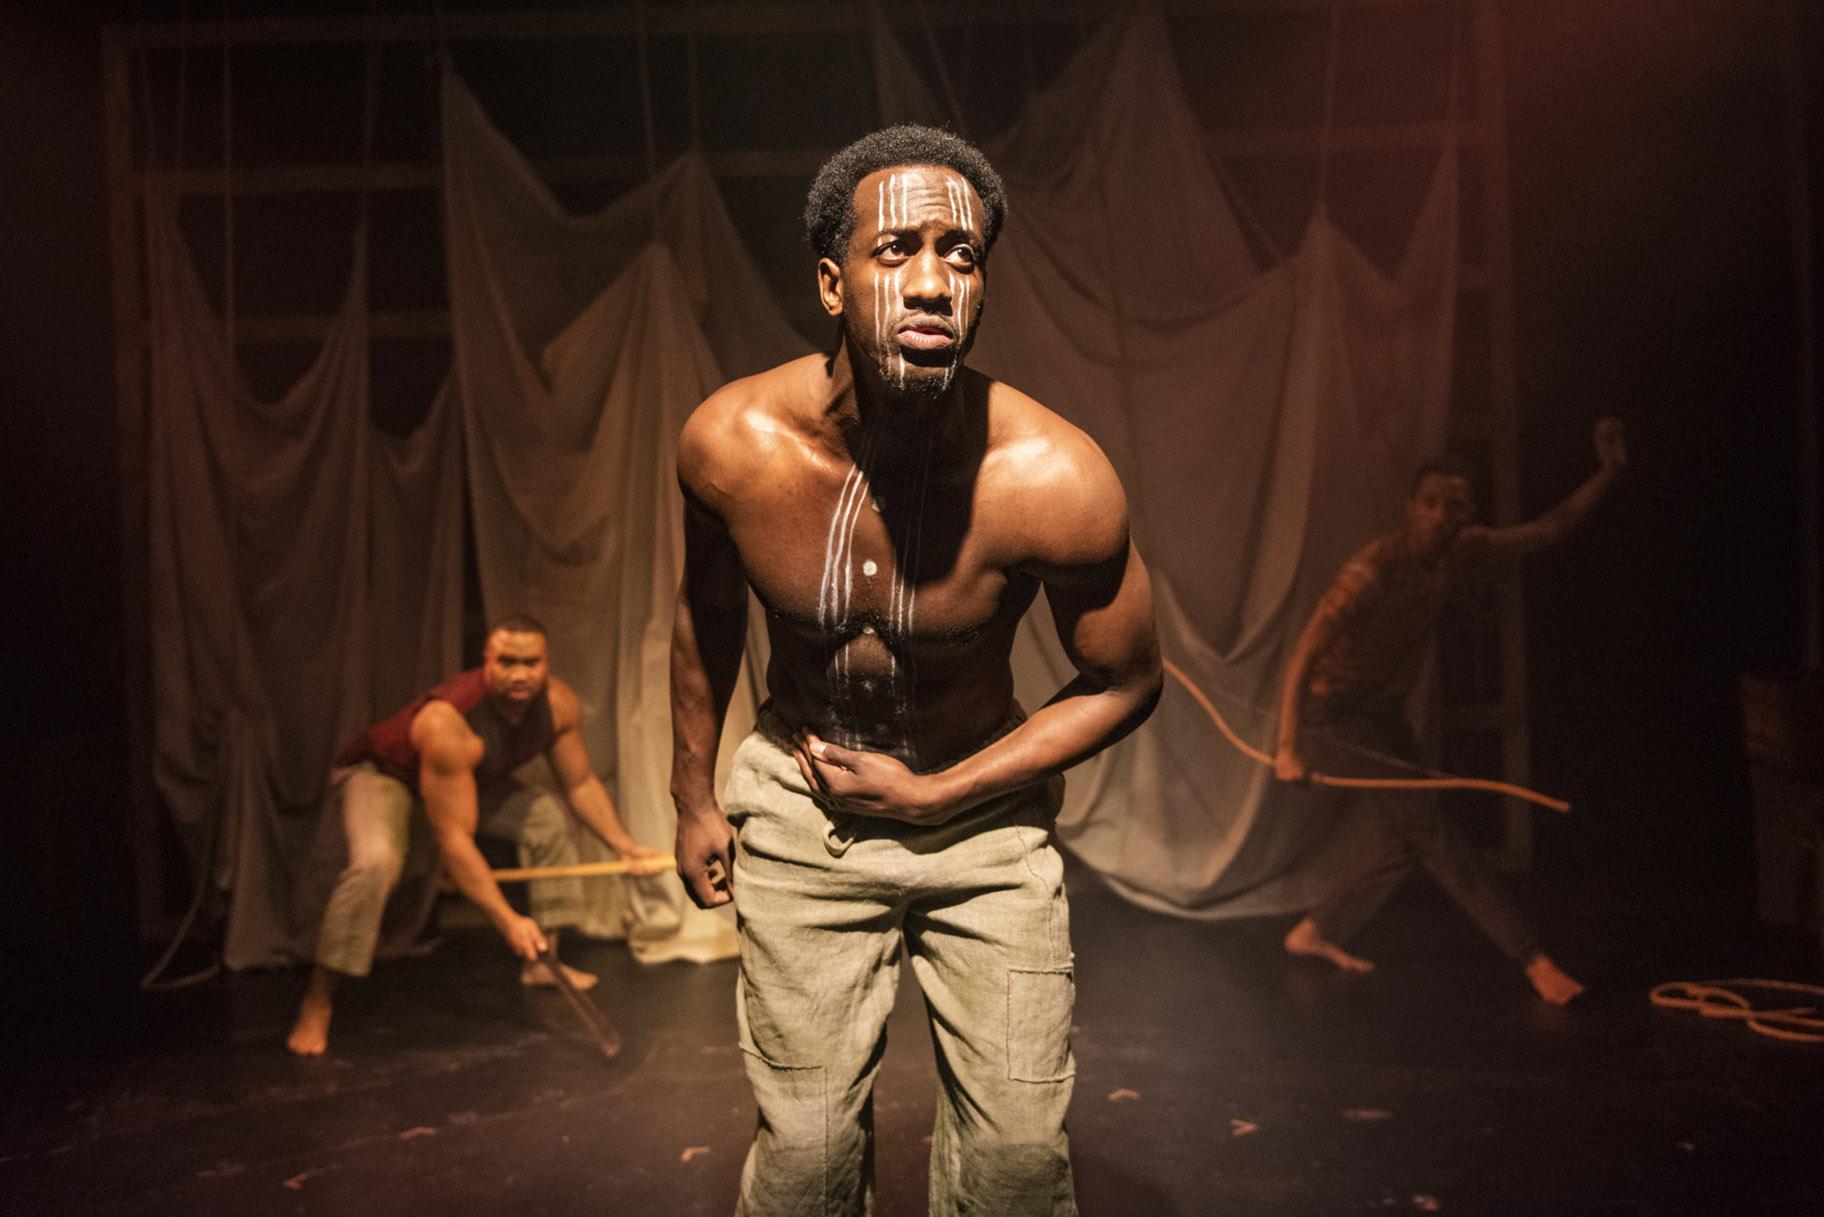 David Goodloe, center, with Lewon Johns, back left, and Michael Turrentine in Griffin Theatre Company’s Midwest premiere of “Mlima’s Tale.” (Photo by Michael Brosilow)